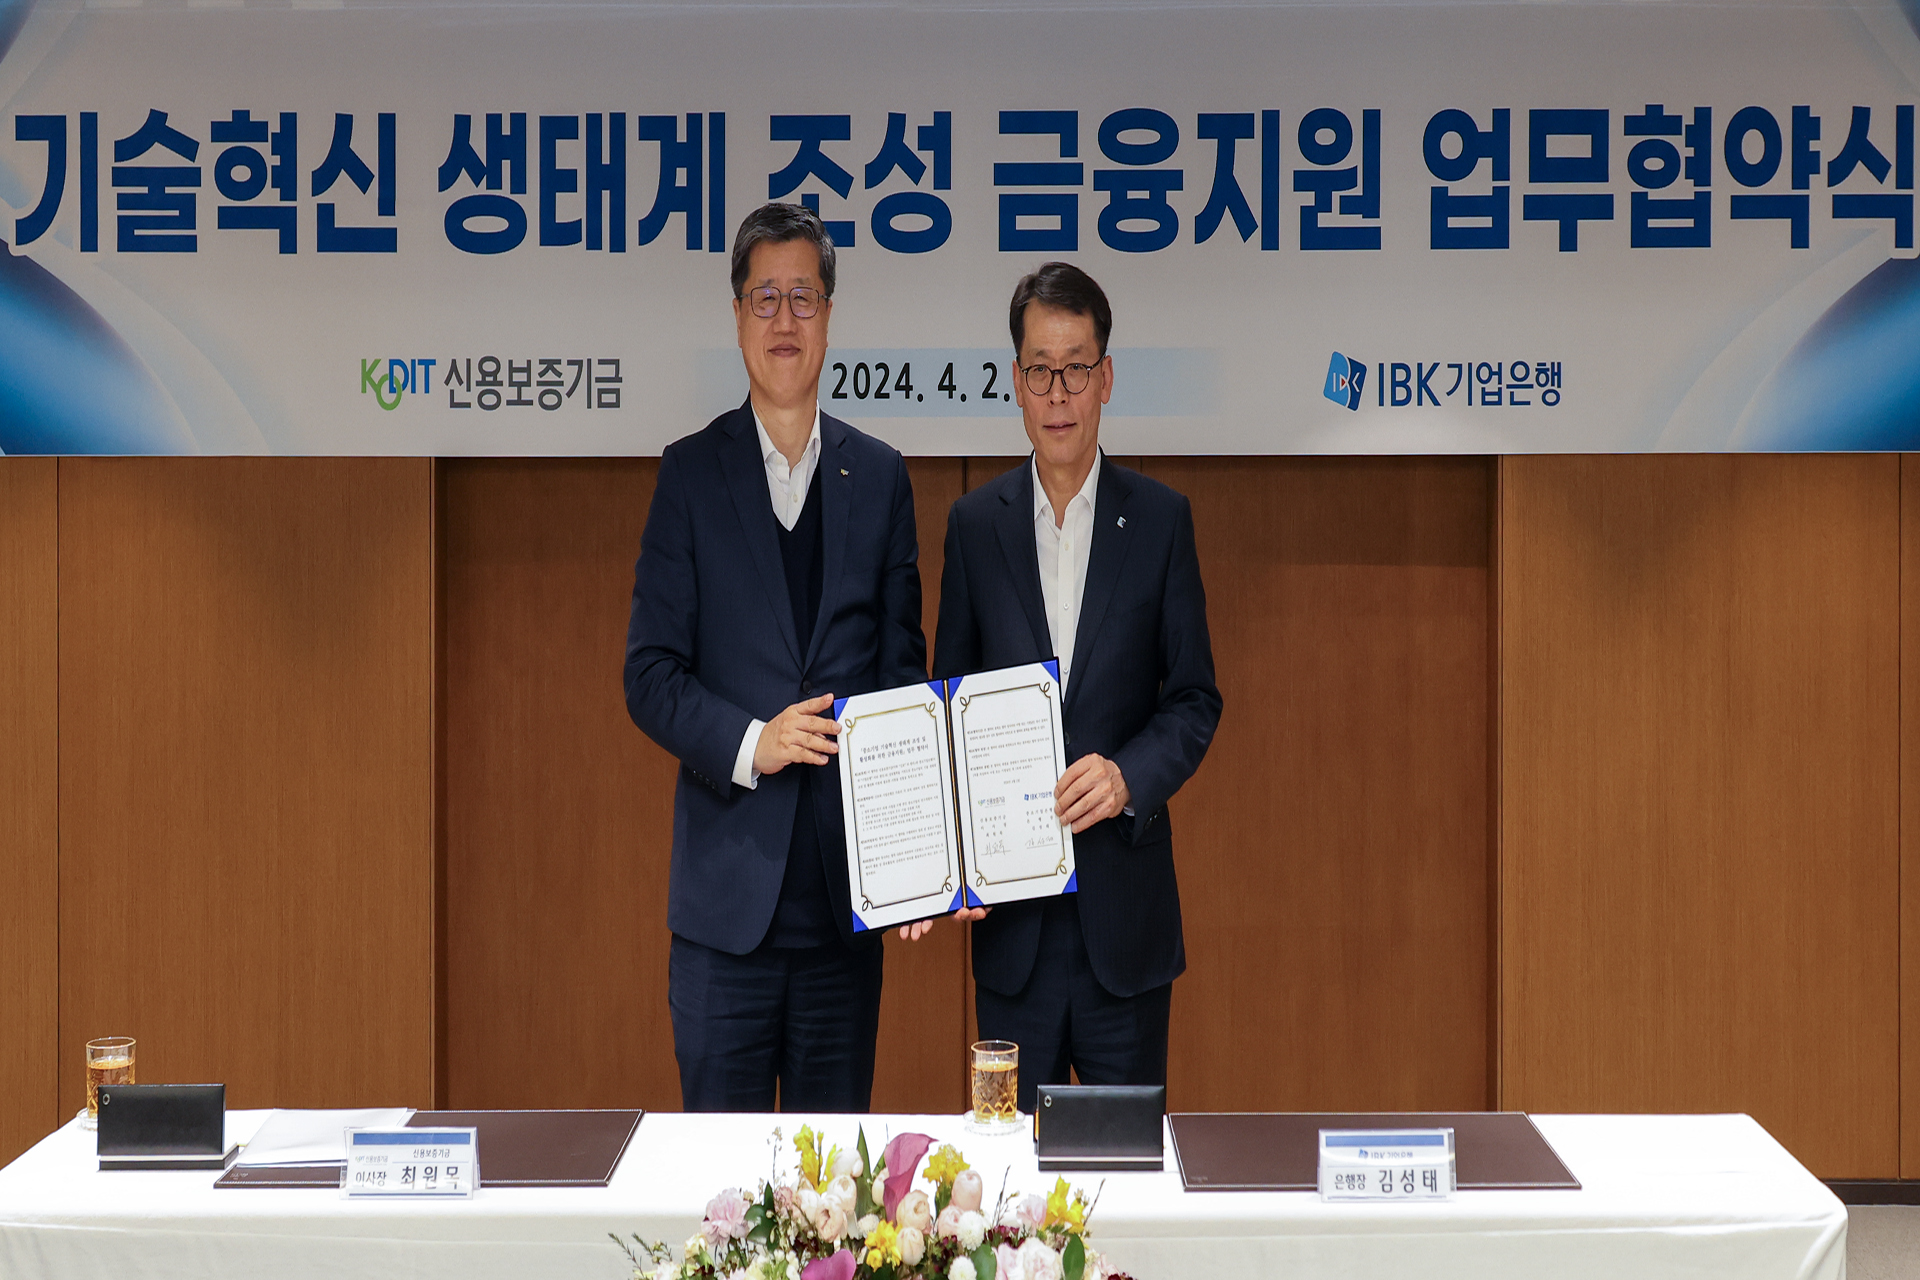 KODIT Signs an MOU on Creating Ecosystem for SMEs' Technological Innovations with IBK (April 4, 2024) images